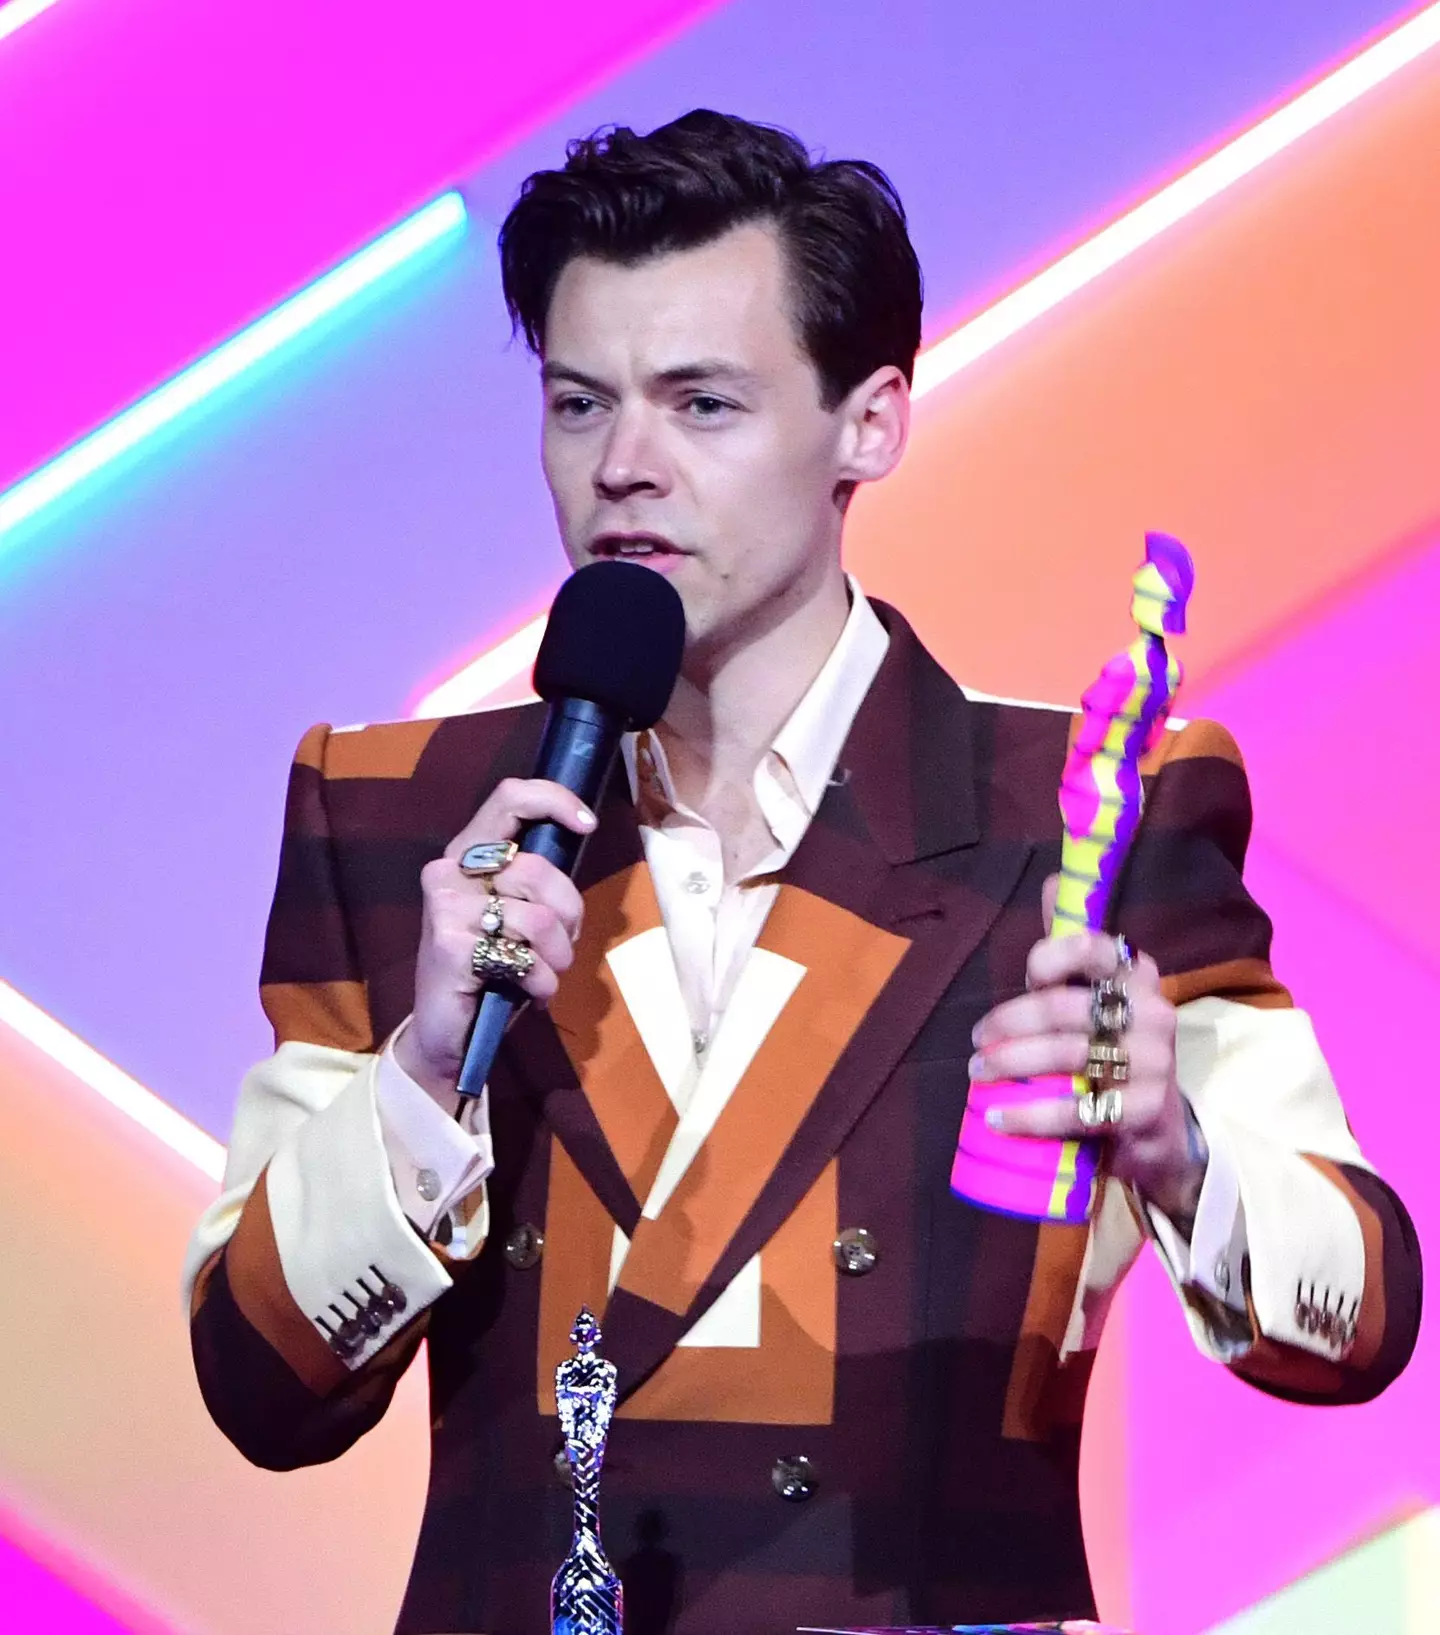 Harry Styles at the 2021 BRIT Awards.